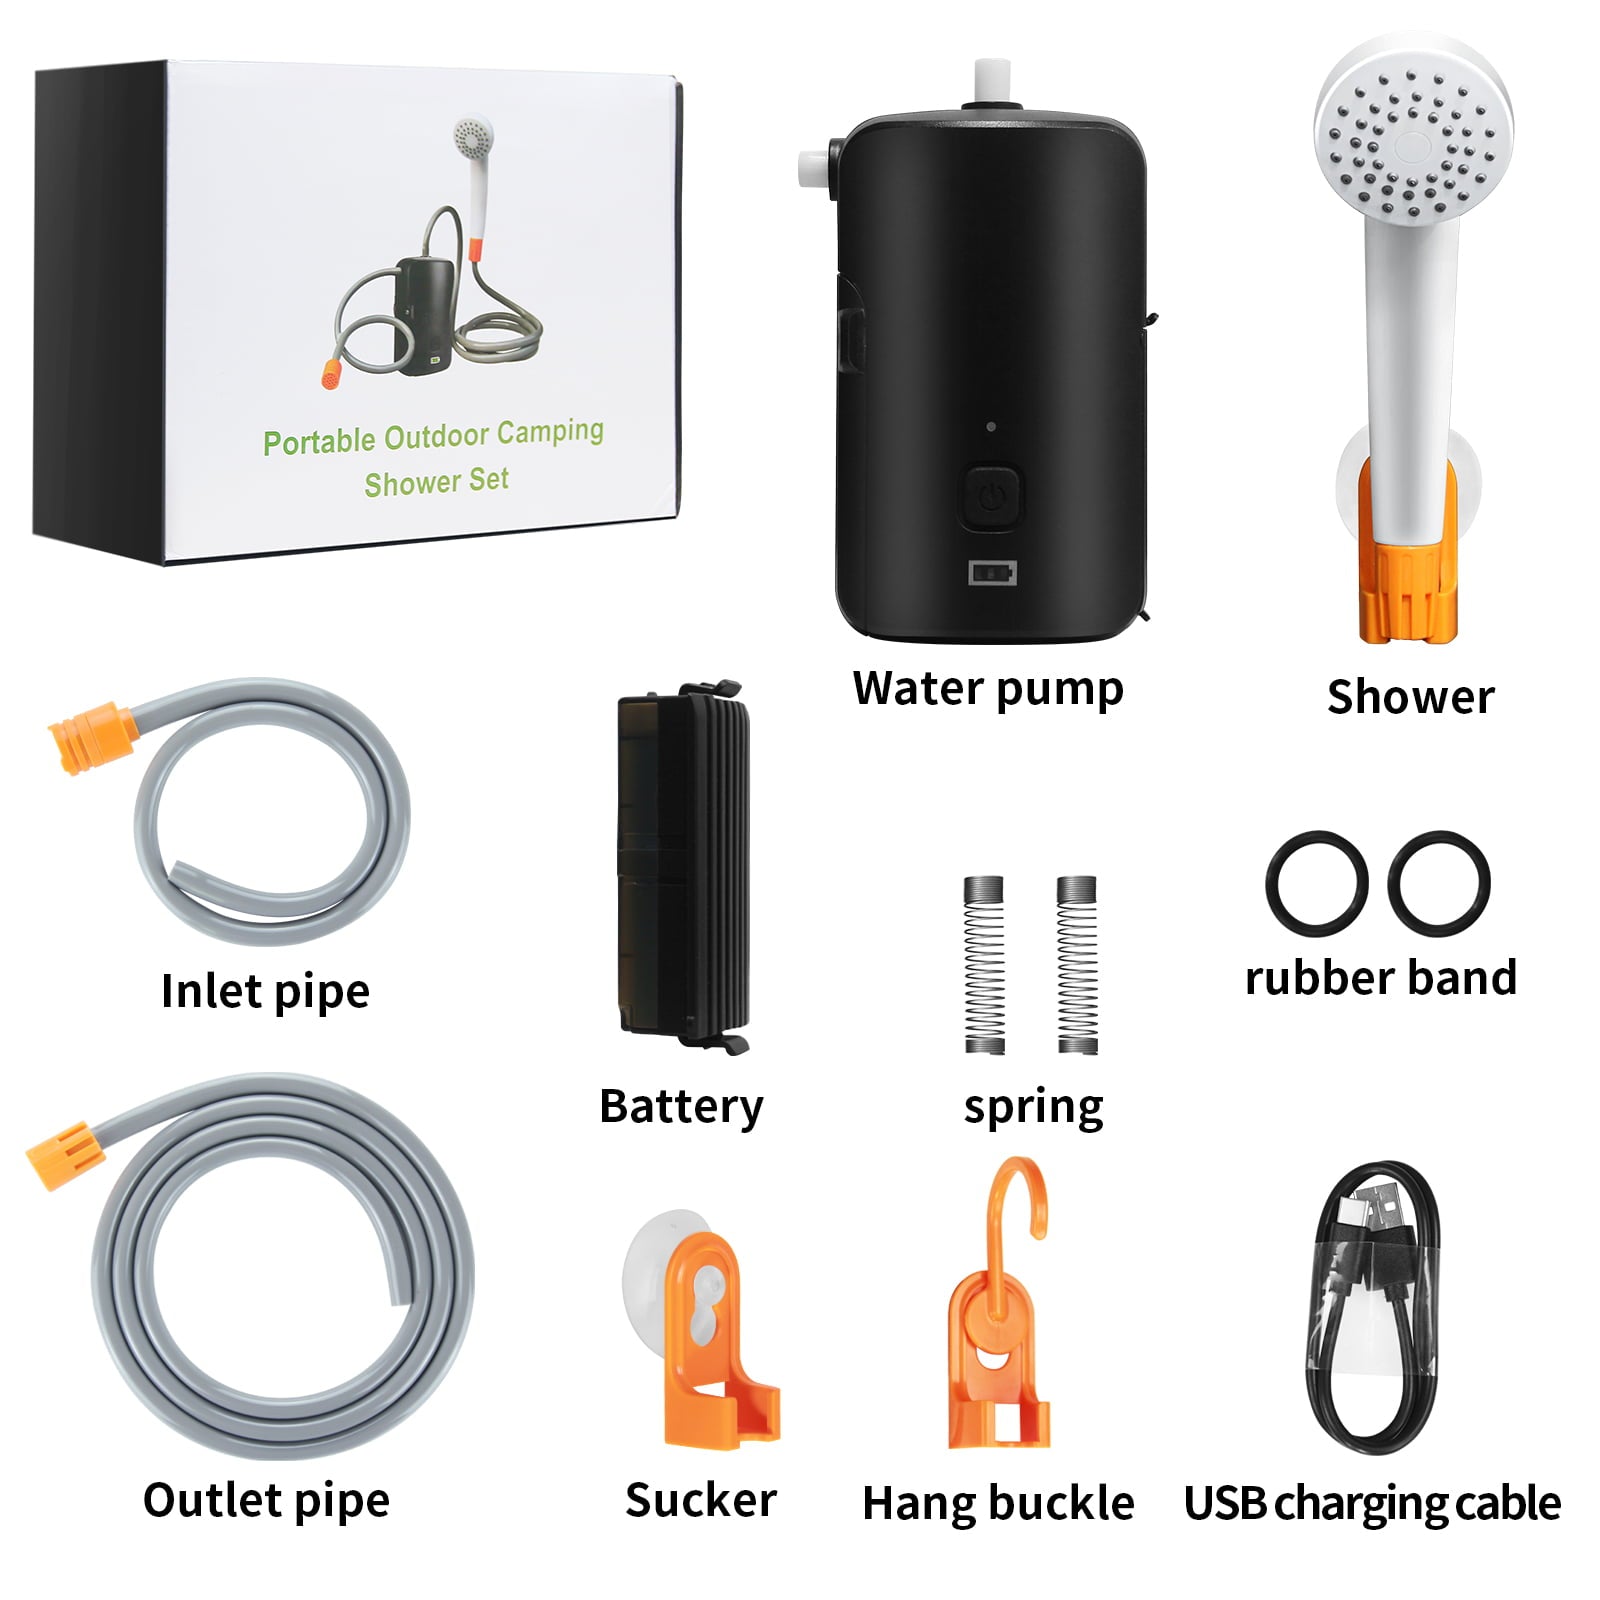 Portable Outdoor Shower, 2 Flow Modes, Removable Rechargeable Battery 4400 mAh with LED Light, Battery Powered Shower Pump for Hiking/Backpacking, Camping, Travel, Beach, Pets, Watering Flowers